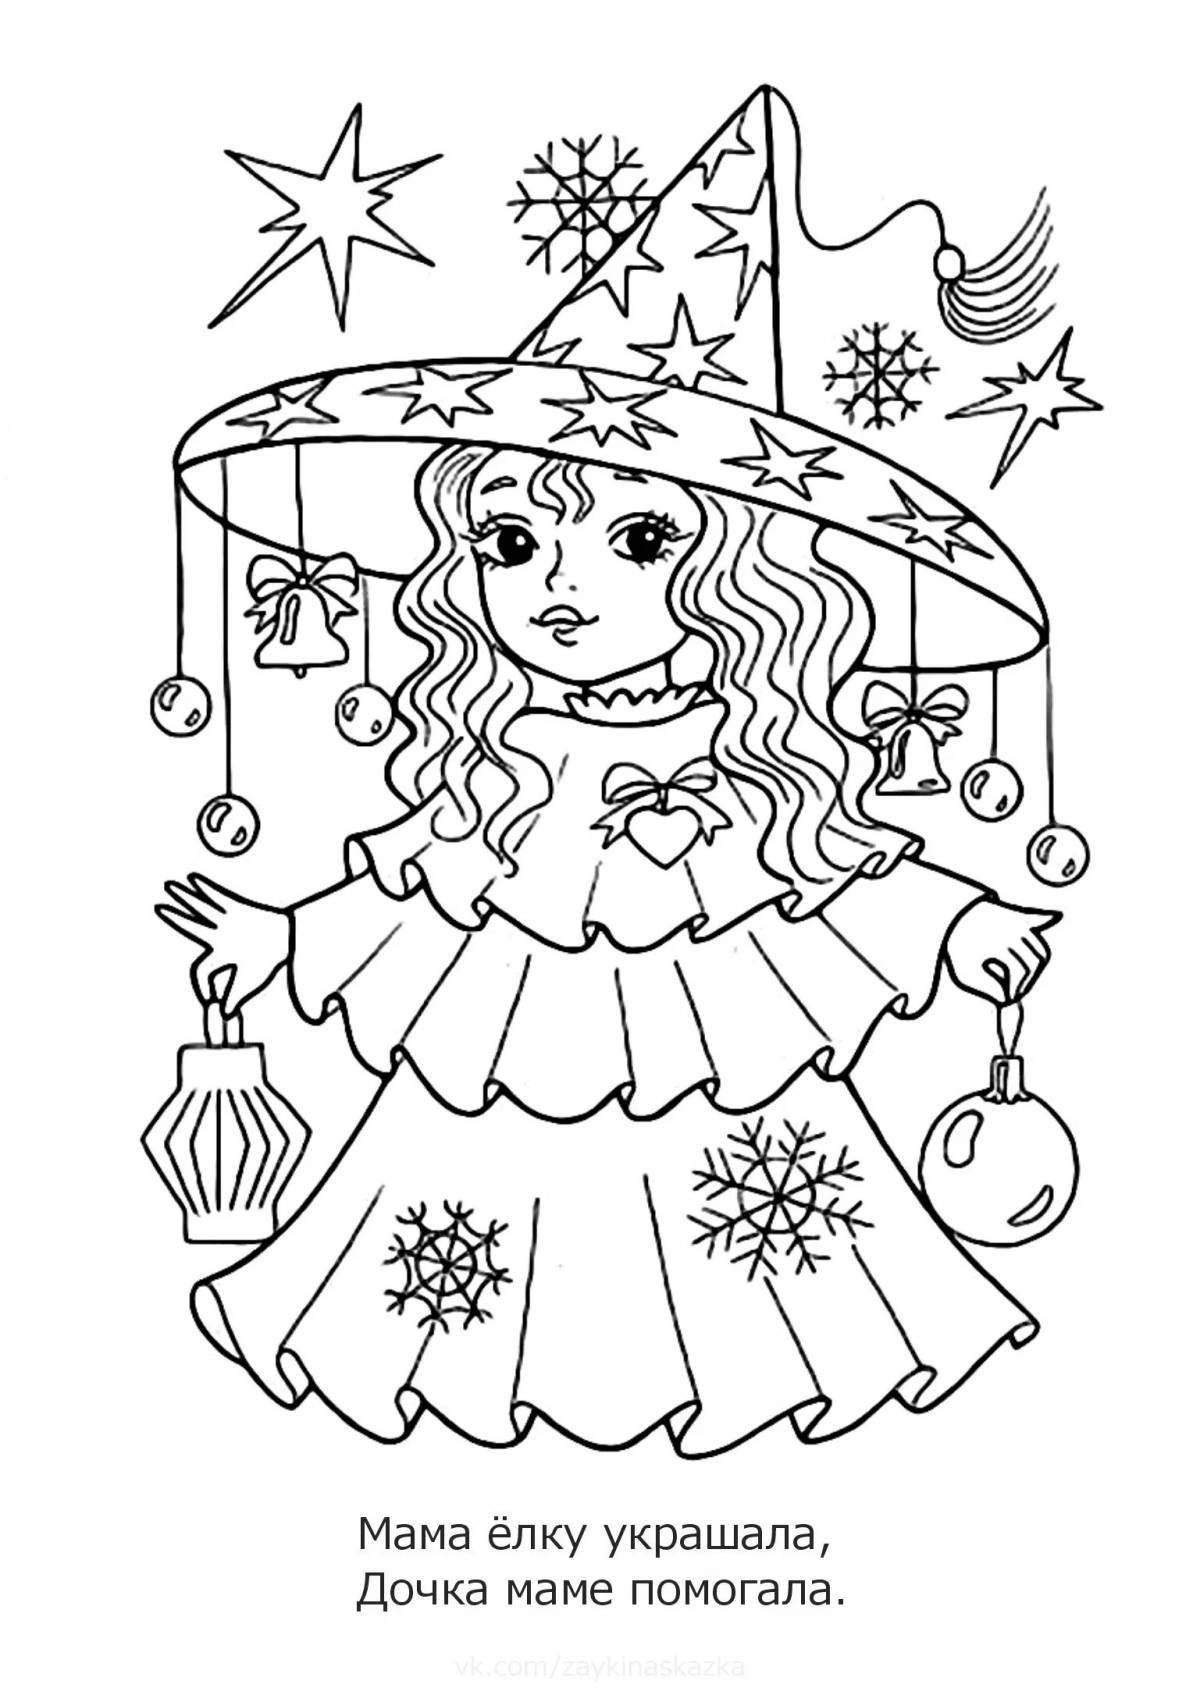 Exquisite Christmas coloring book for girls 8 years old